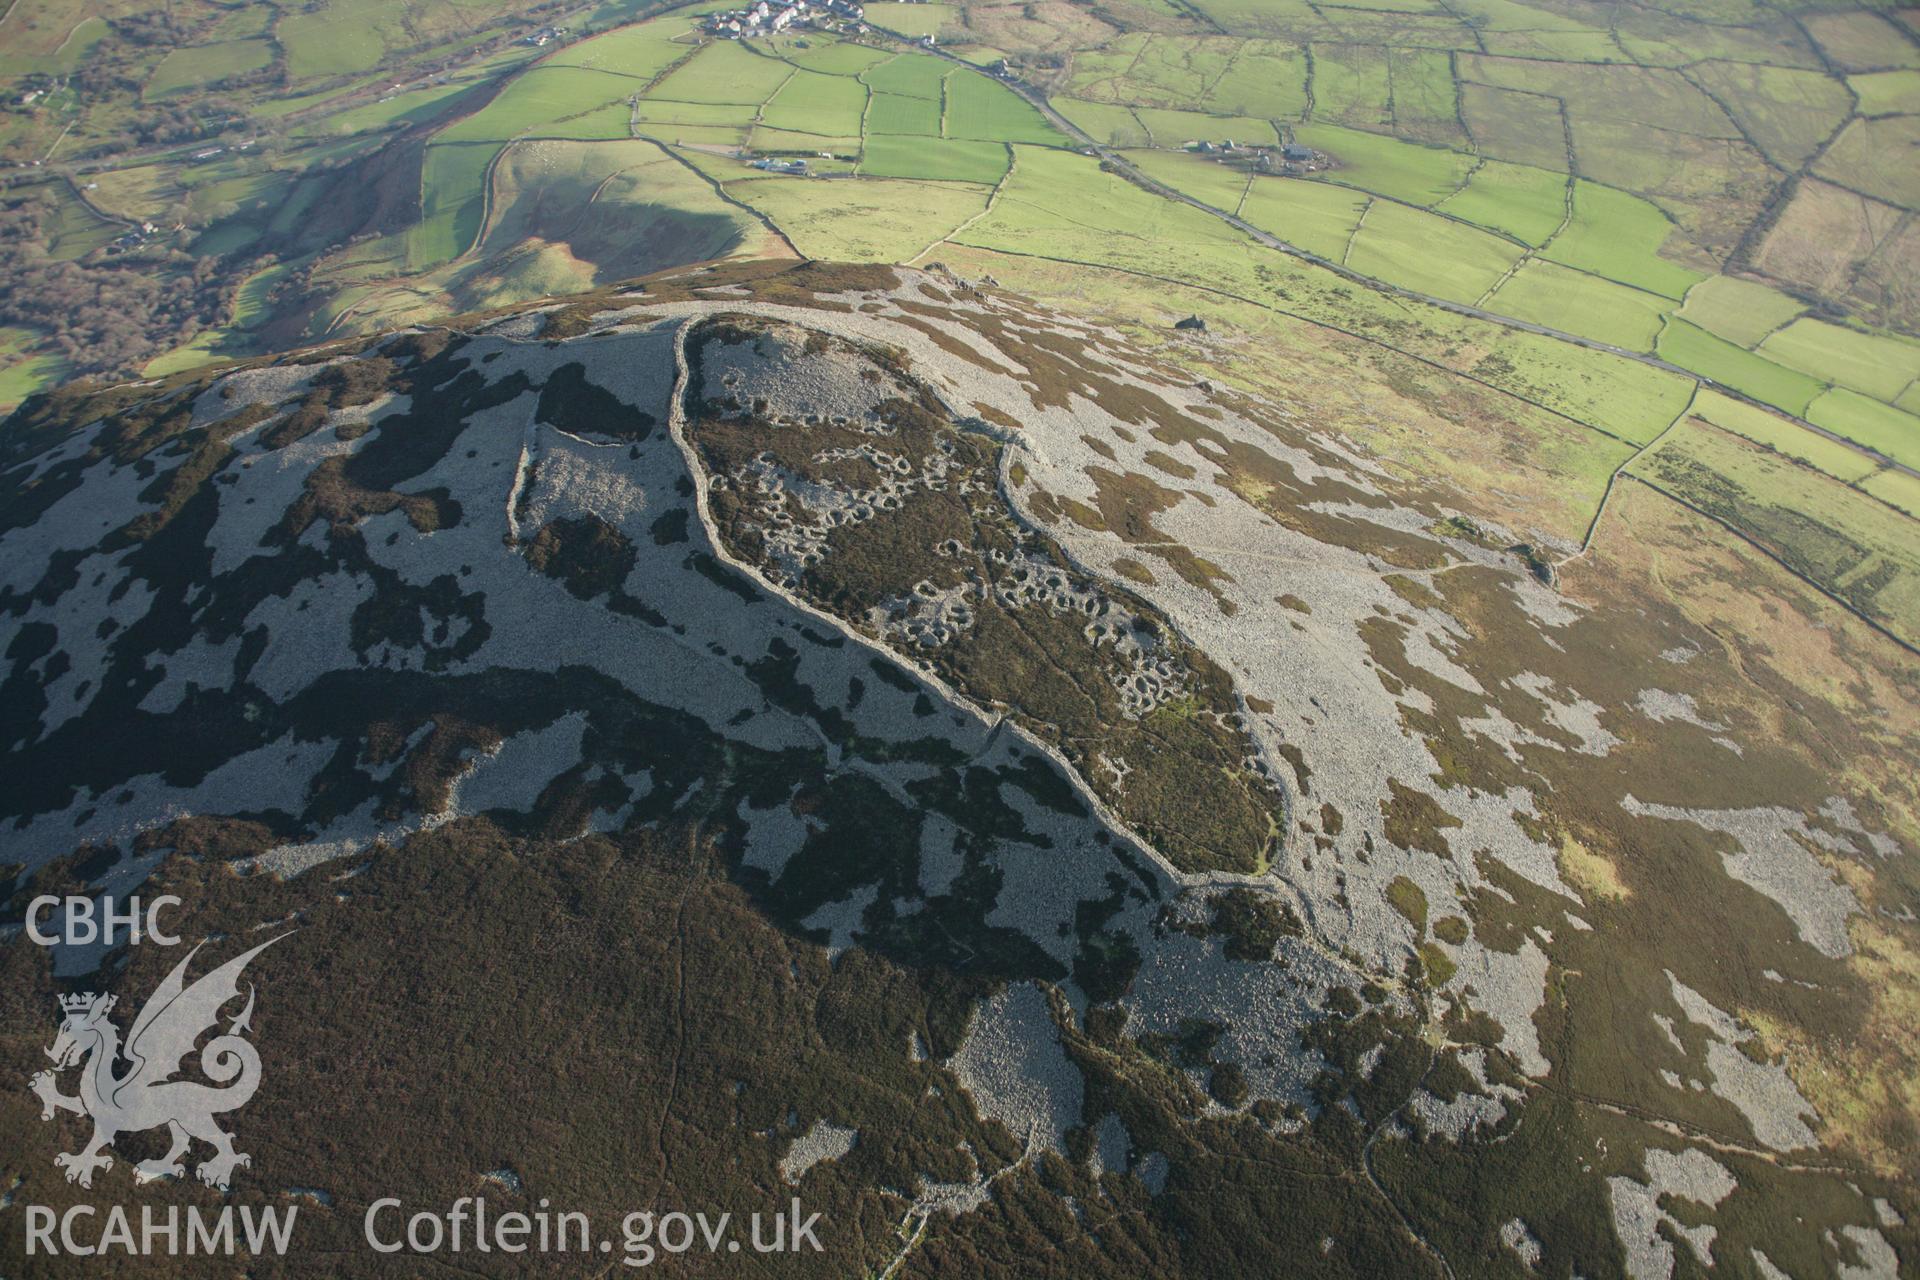 RCAHMW colour oblique aerial photograph of Tre'r Ceiri Fort, Llanaelhaearn. Taken on 25 January 2007 by Toby Driver